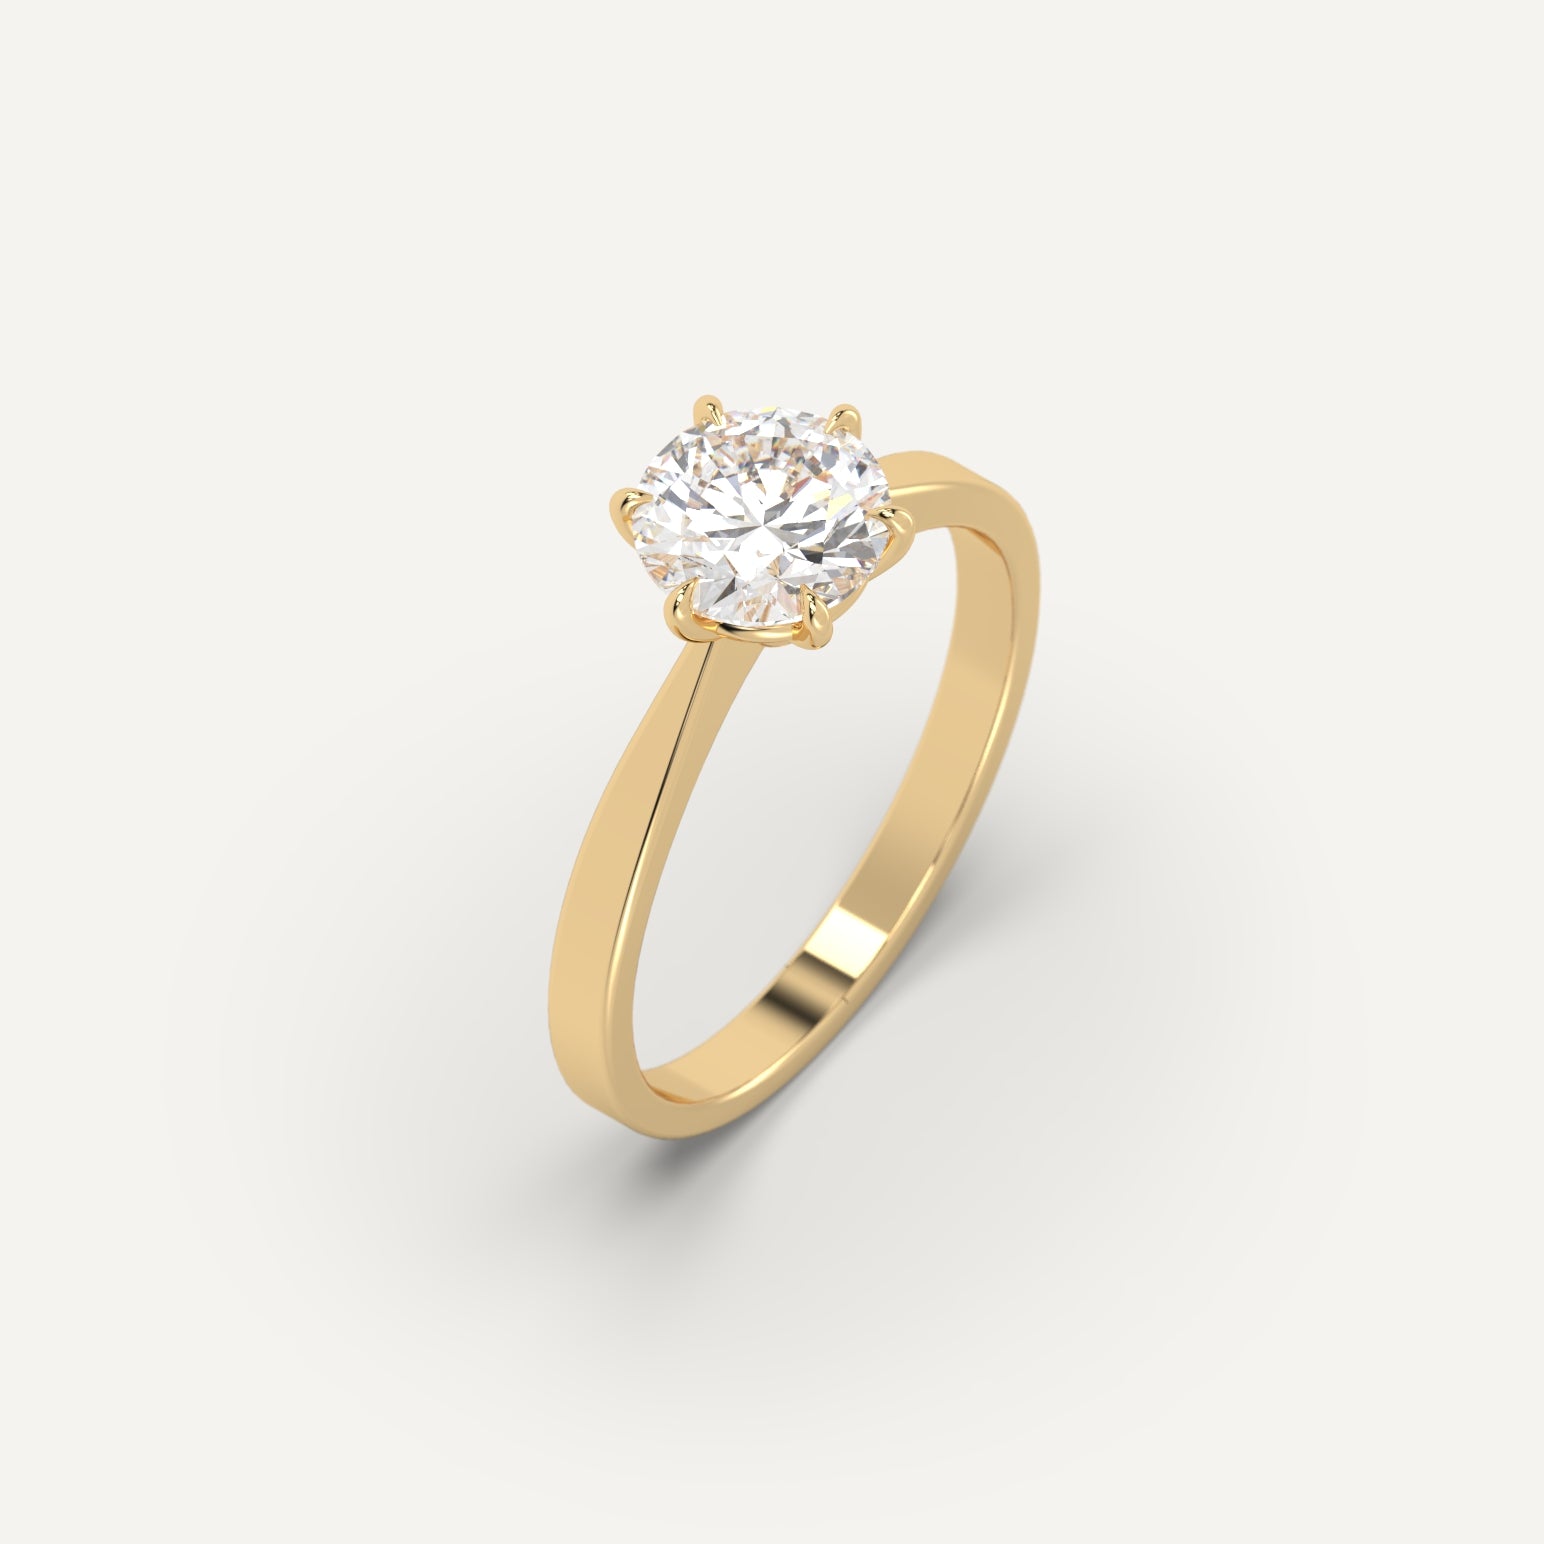 1 carat Round Cut Engagement Ring in 14k Yellow Gold